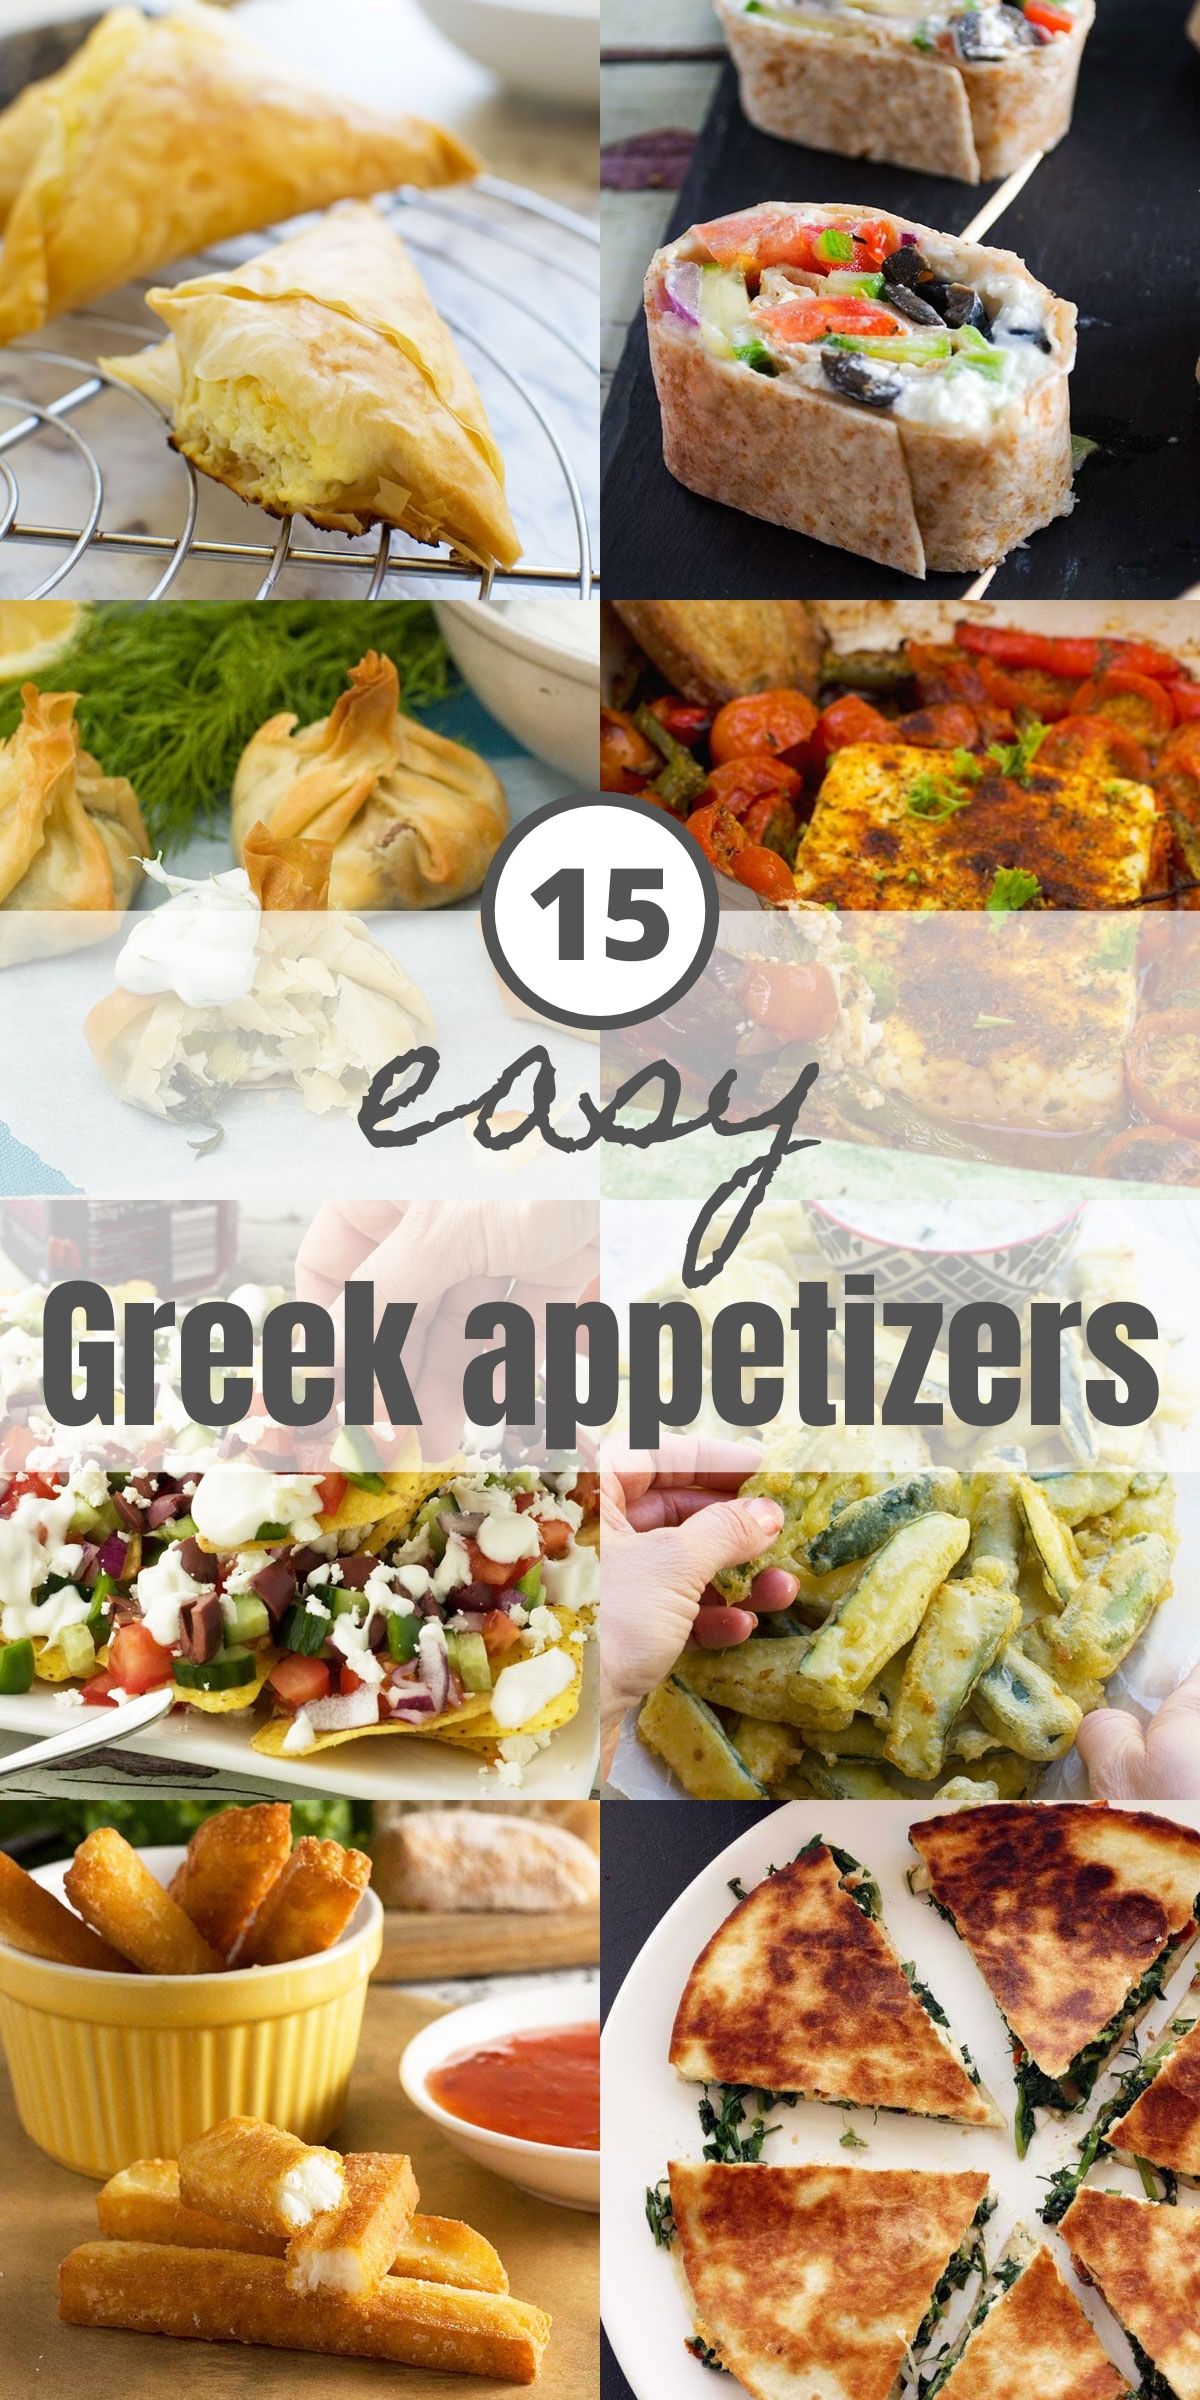 A collage of 8 small images showing 8 easy Greek appetizers for Pinterest